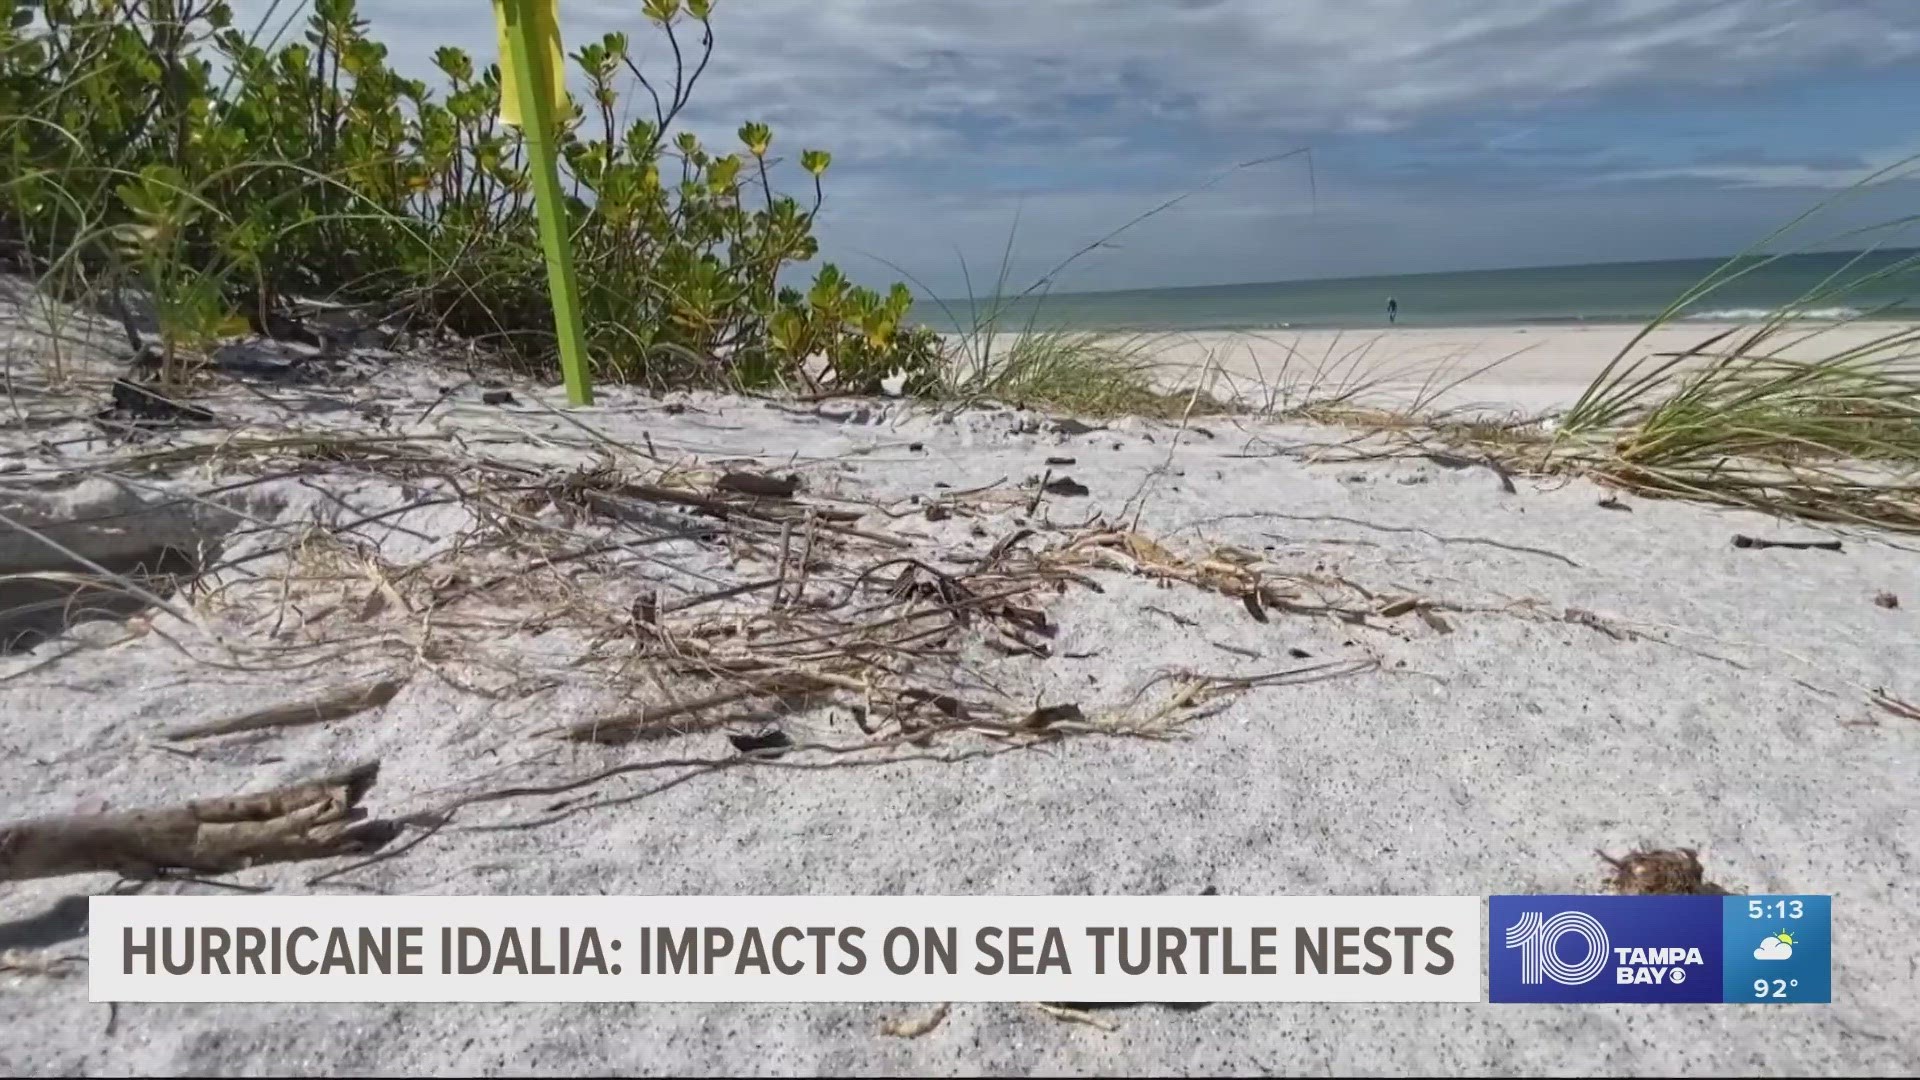 Sea turtle hatching season runs through late October. This year, many hatchlings made it to the water early thanks to record summer temperatures.